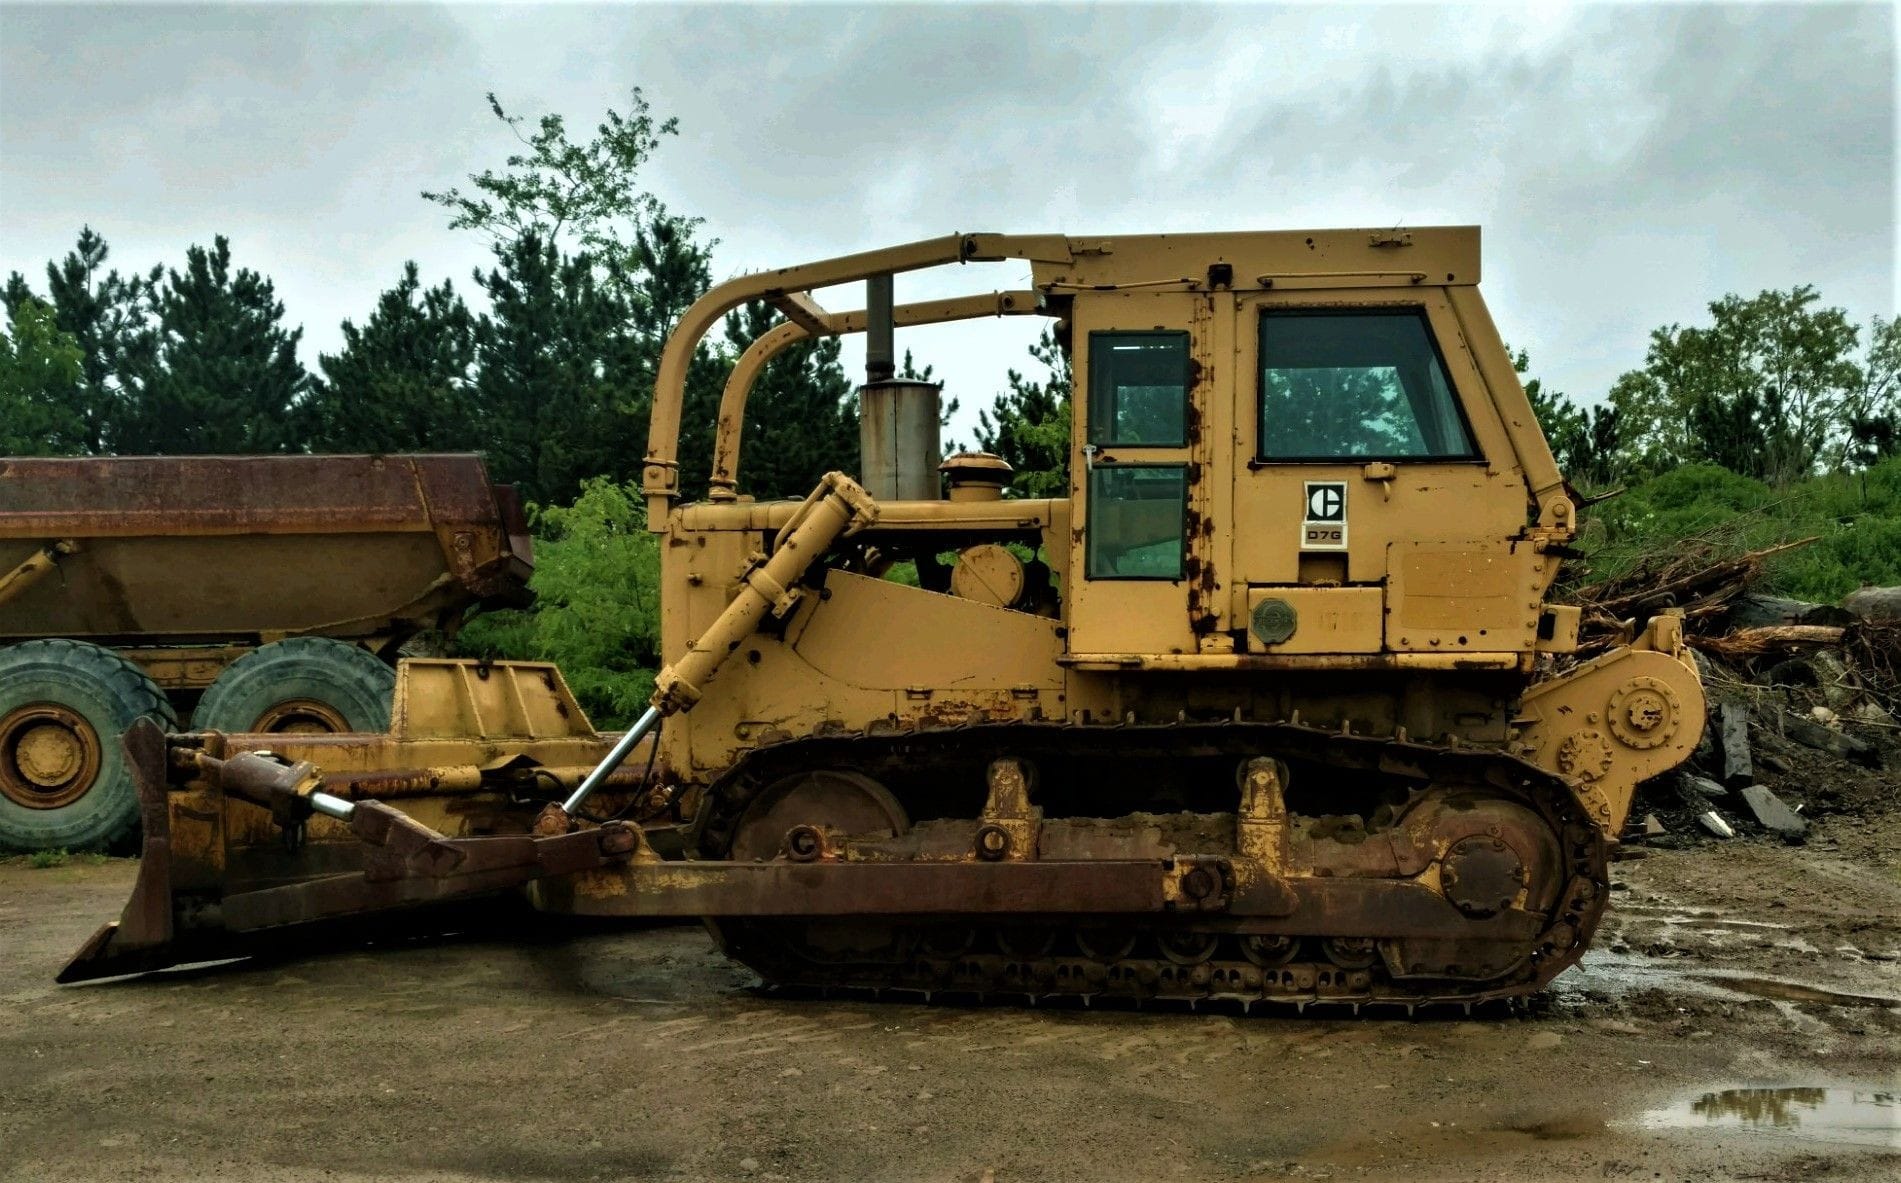 Sideview of a Dozer